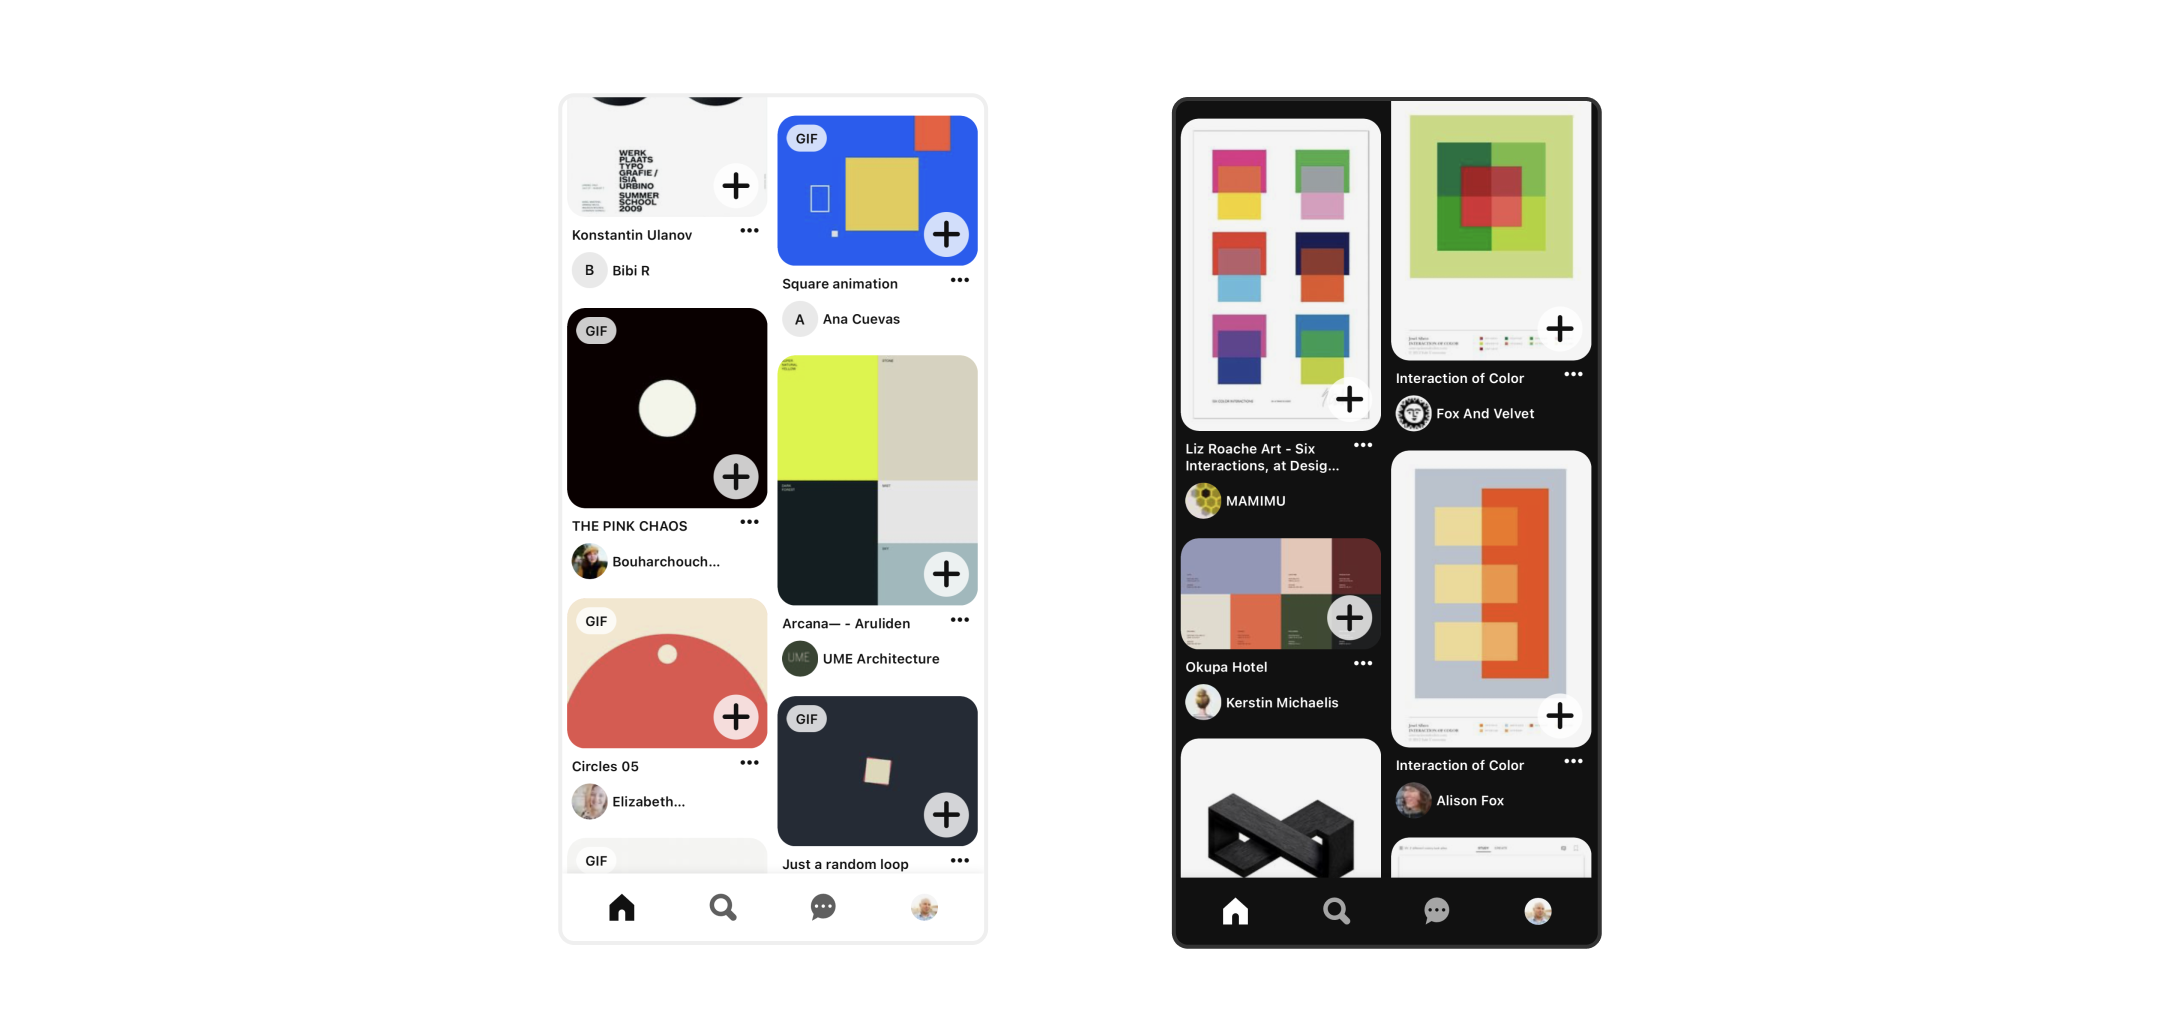 Side-by-side examples of light mode and dark mode in the Pinterest app.